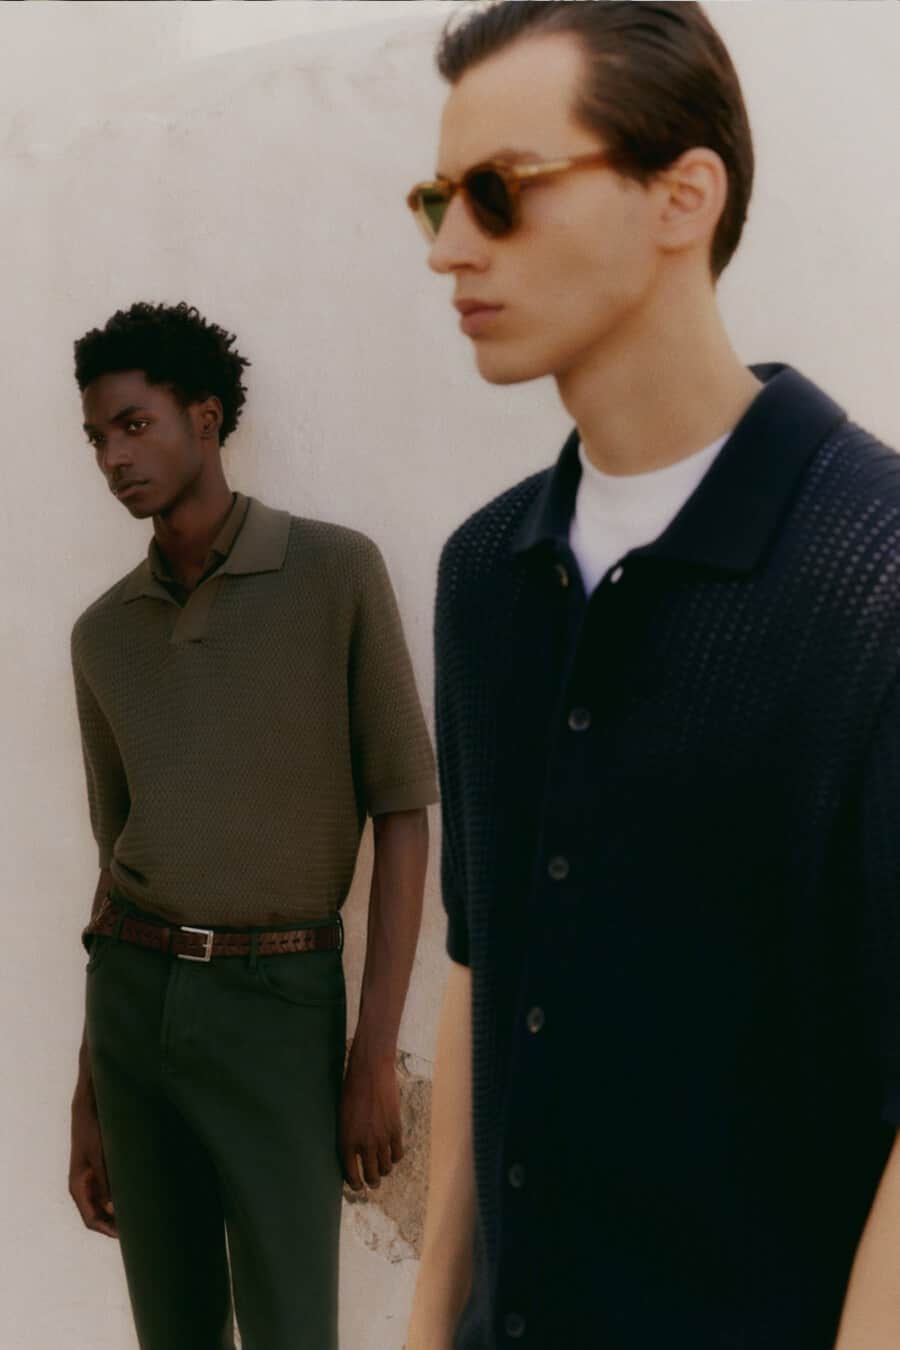 Black man and white man wearing knitted navy and green shirts by Massimo Dutti